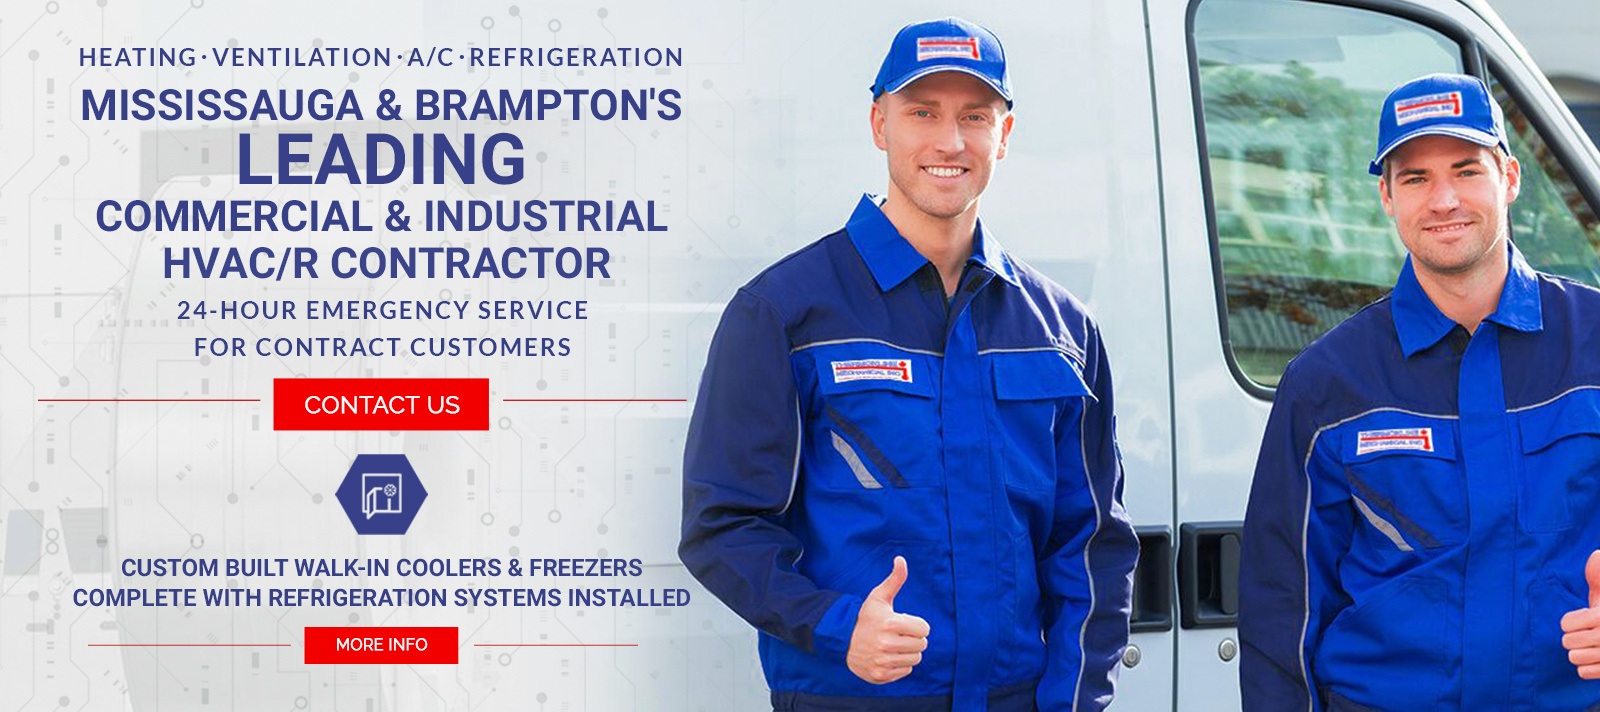 The GTA's Leading Commercial Industrial HVAC and Service by Thermokline Mechanical